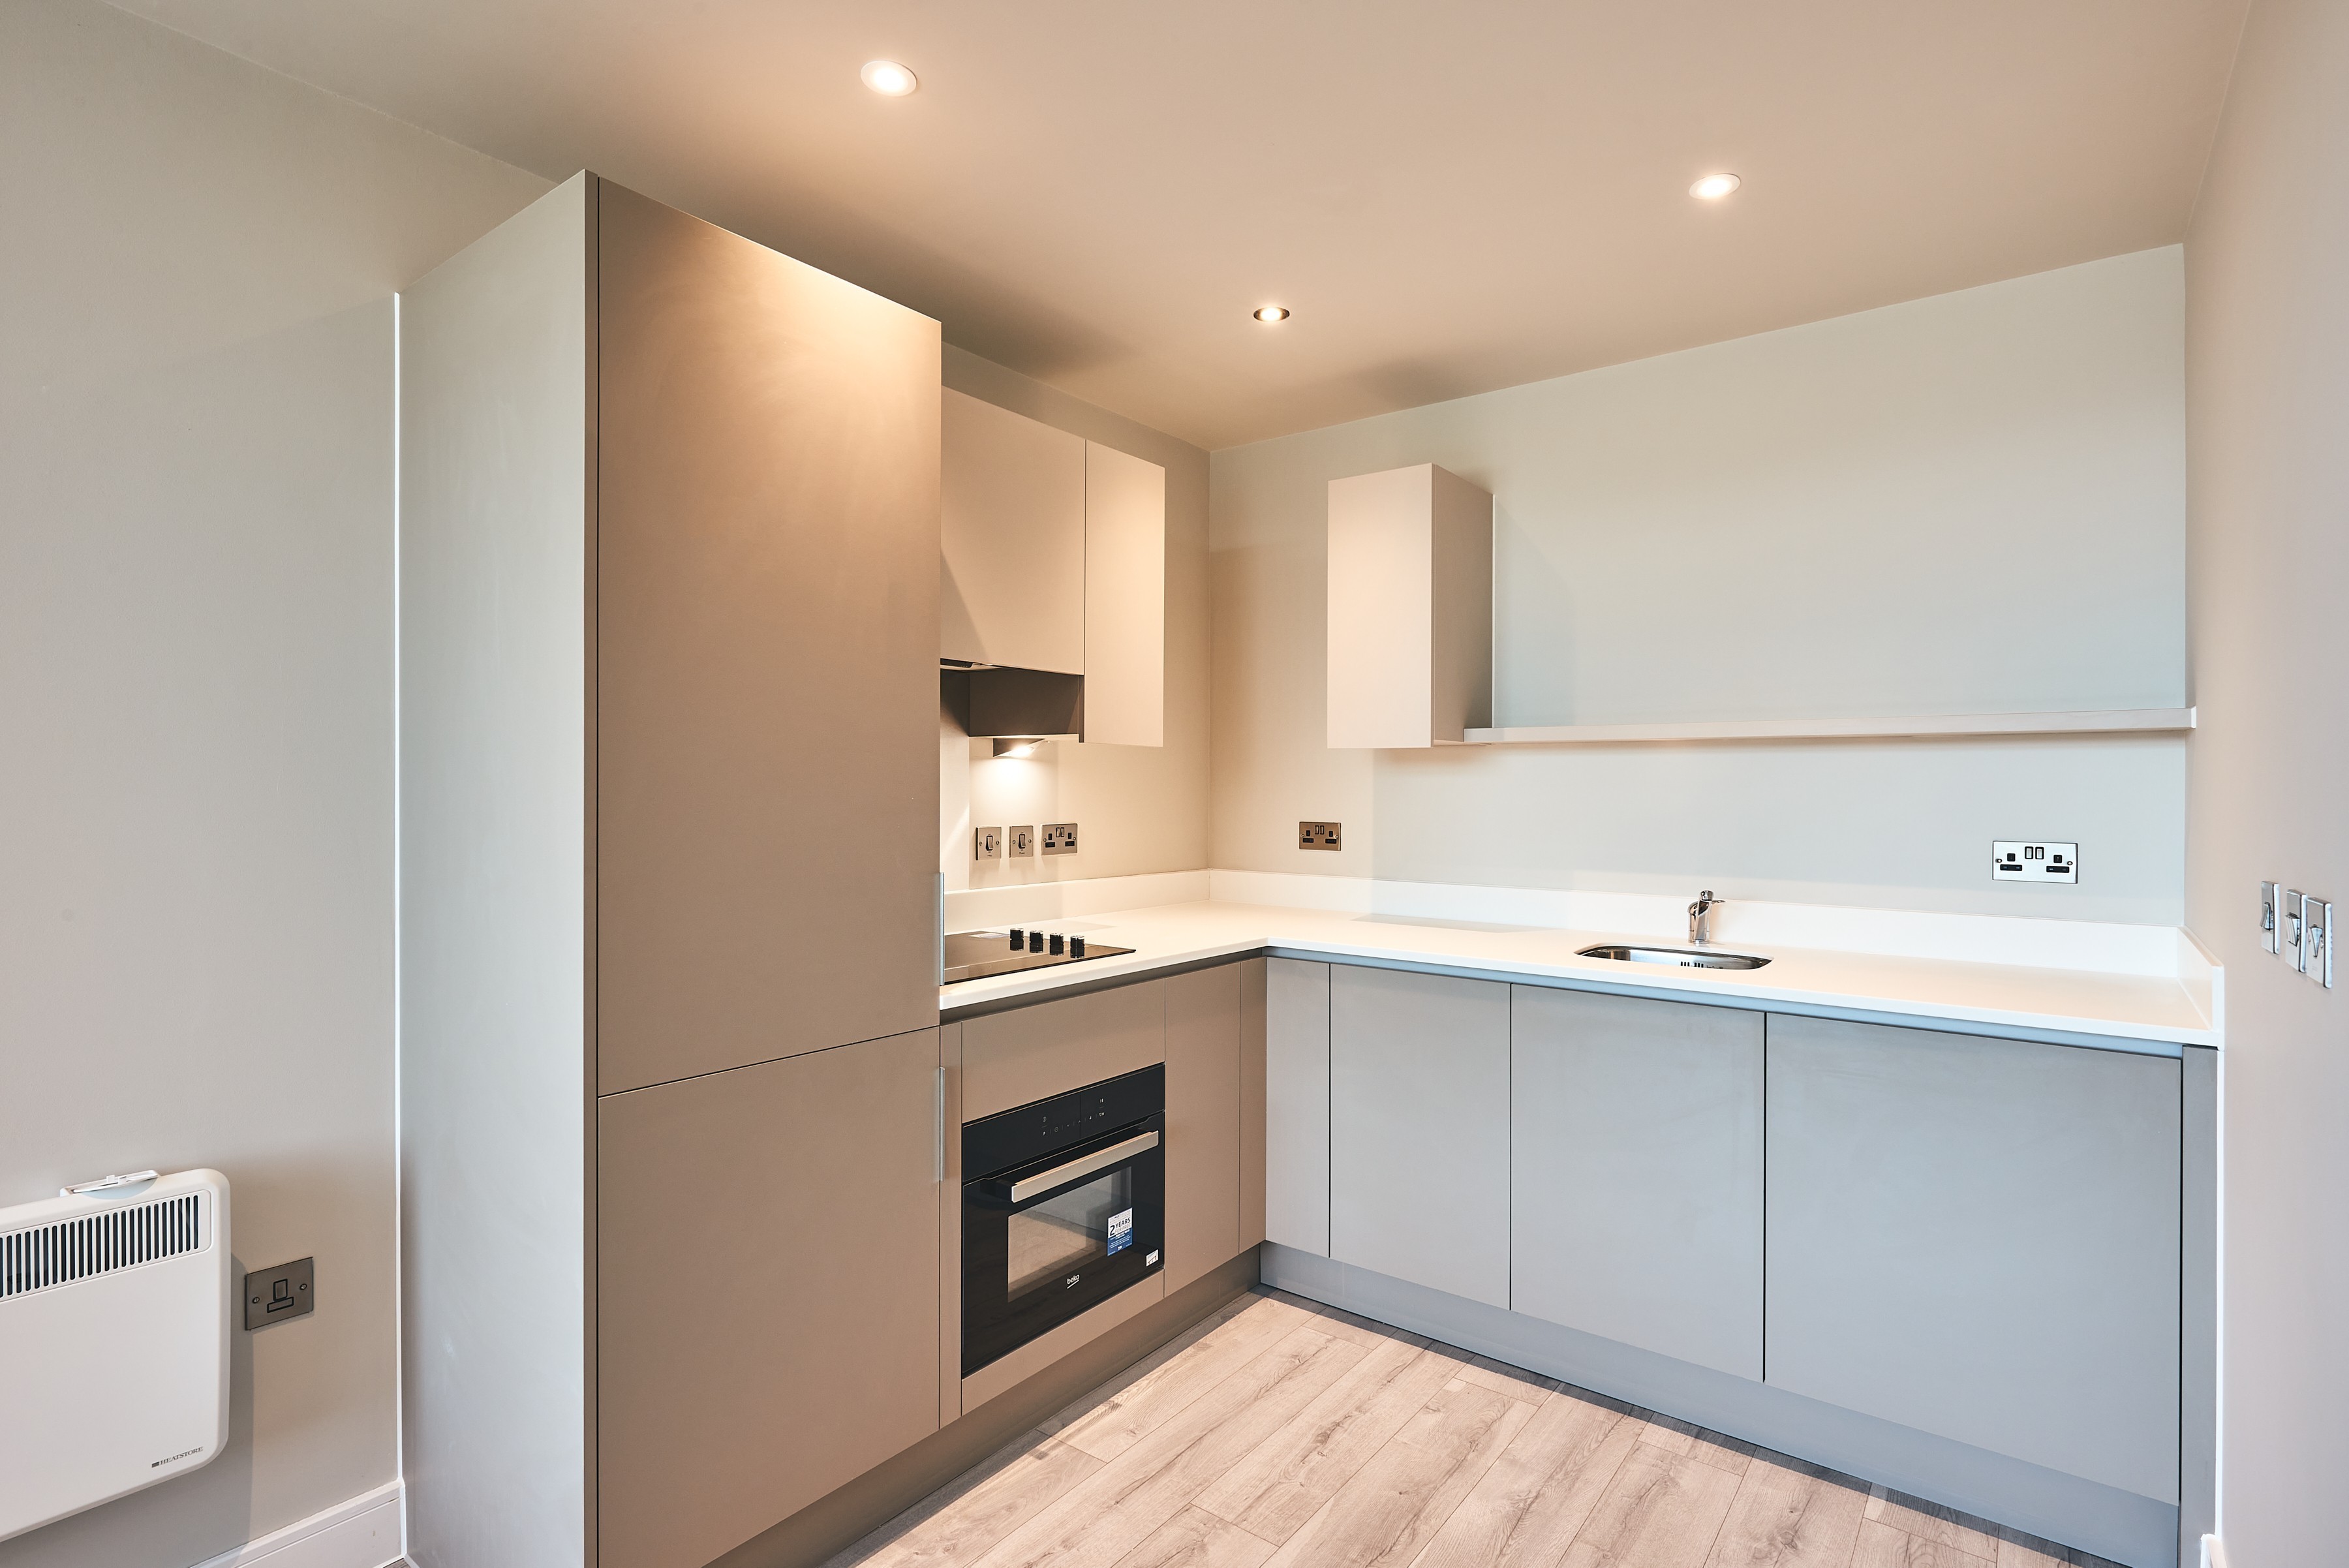 Bracknell - Luxurious & Chic Apartments - Free Parking